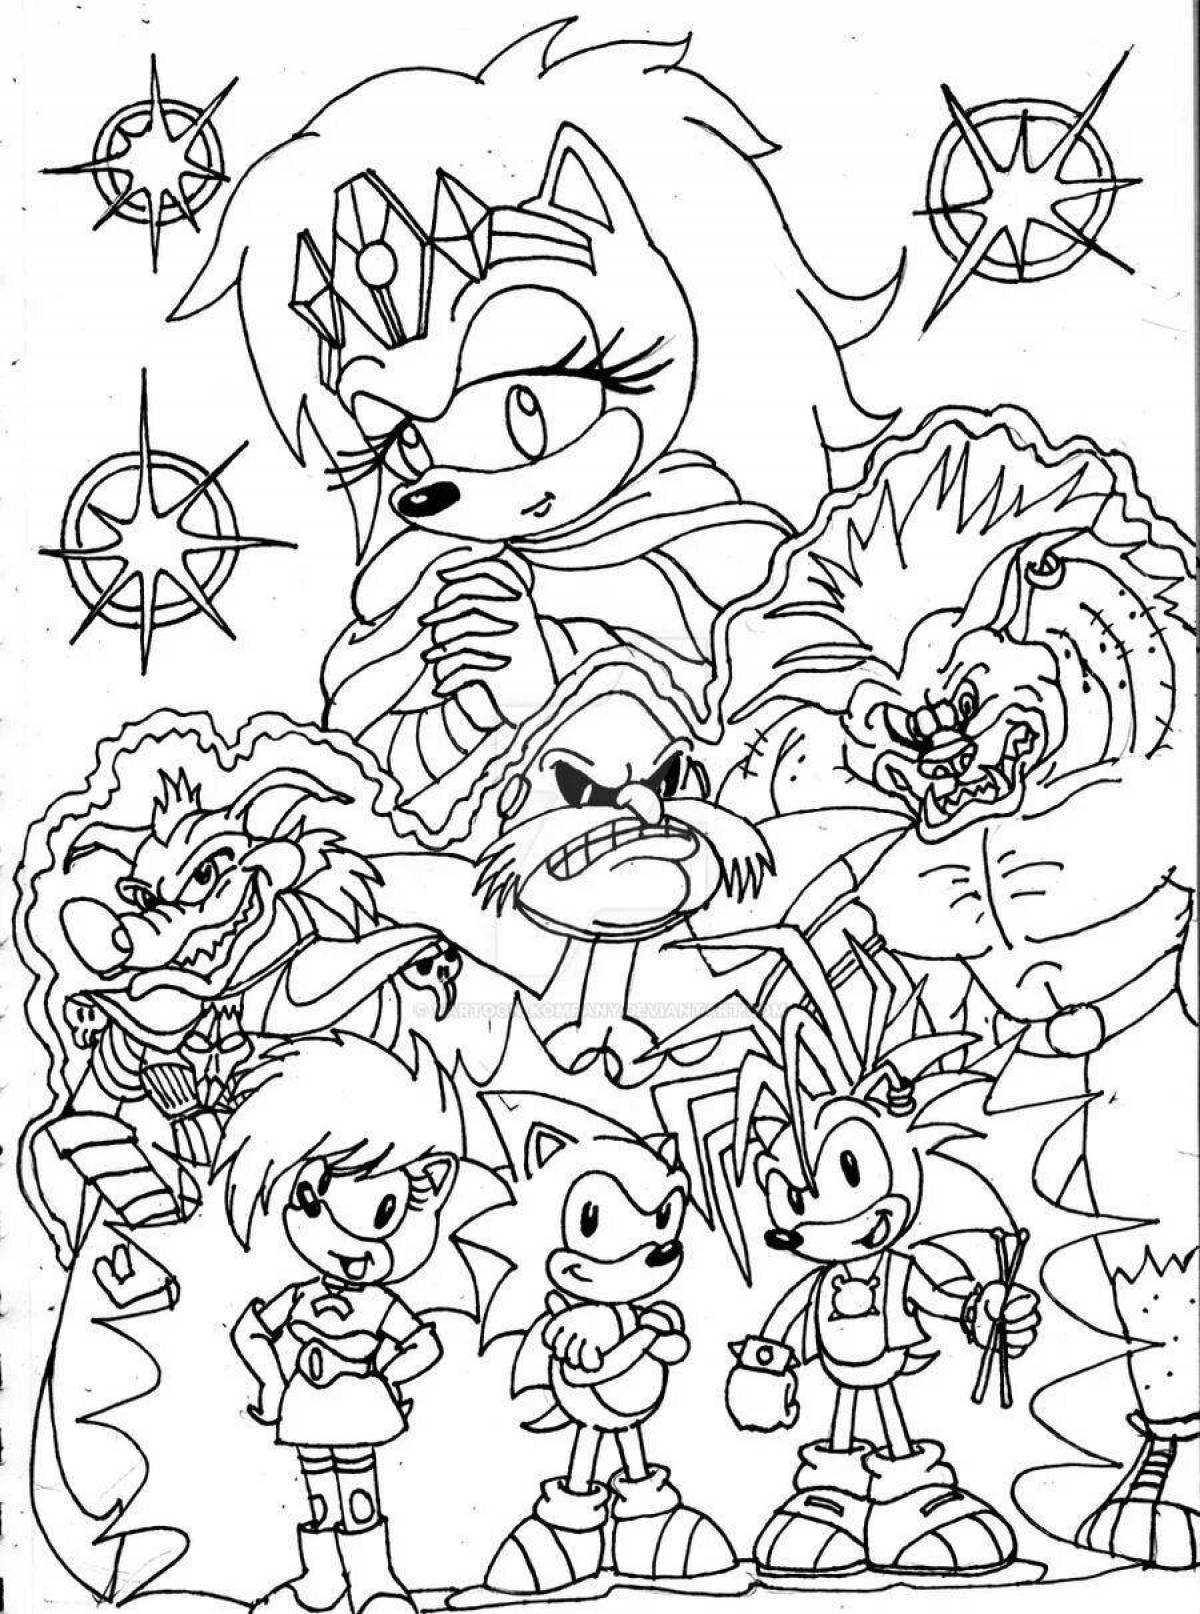 Amazing sonic whole team coloring book